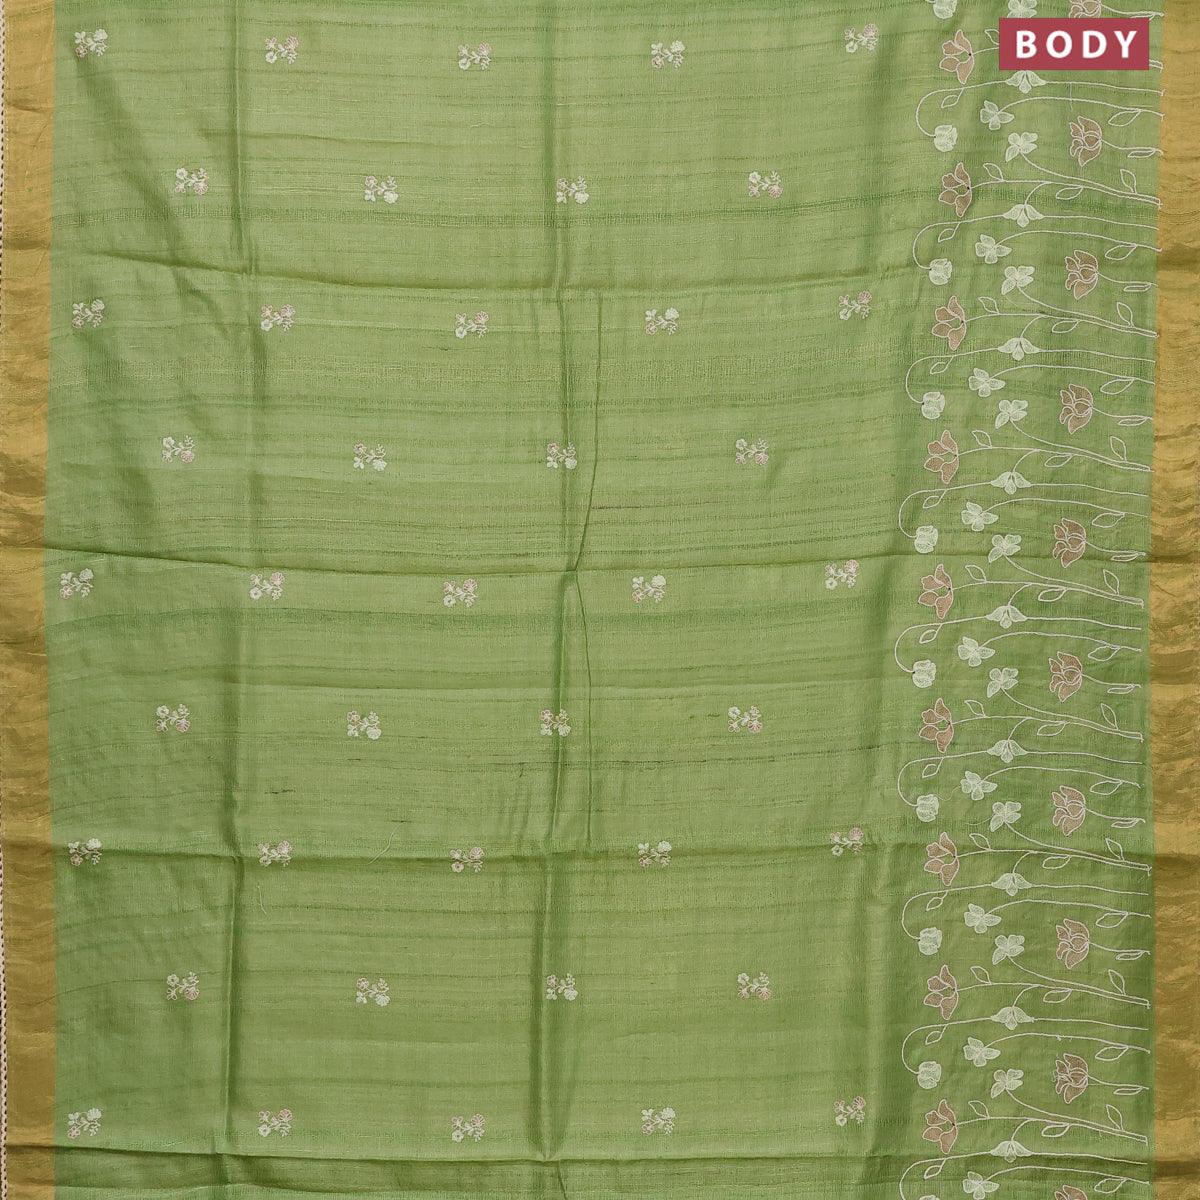 Pastel pista green hues for the coming year! This silk sarees with